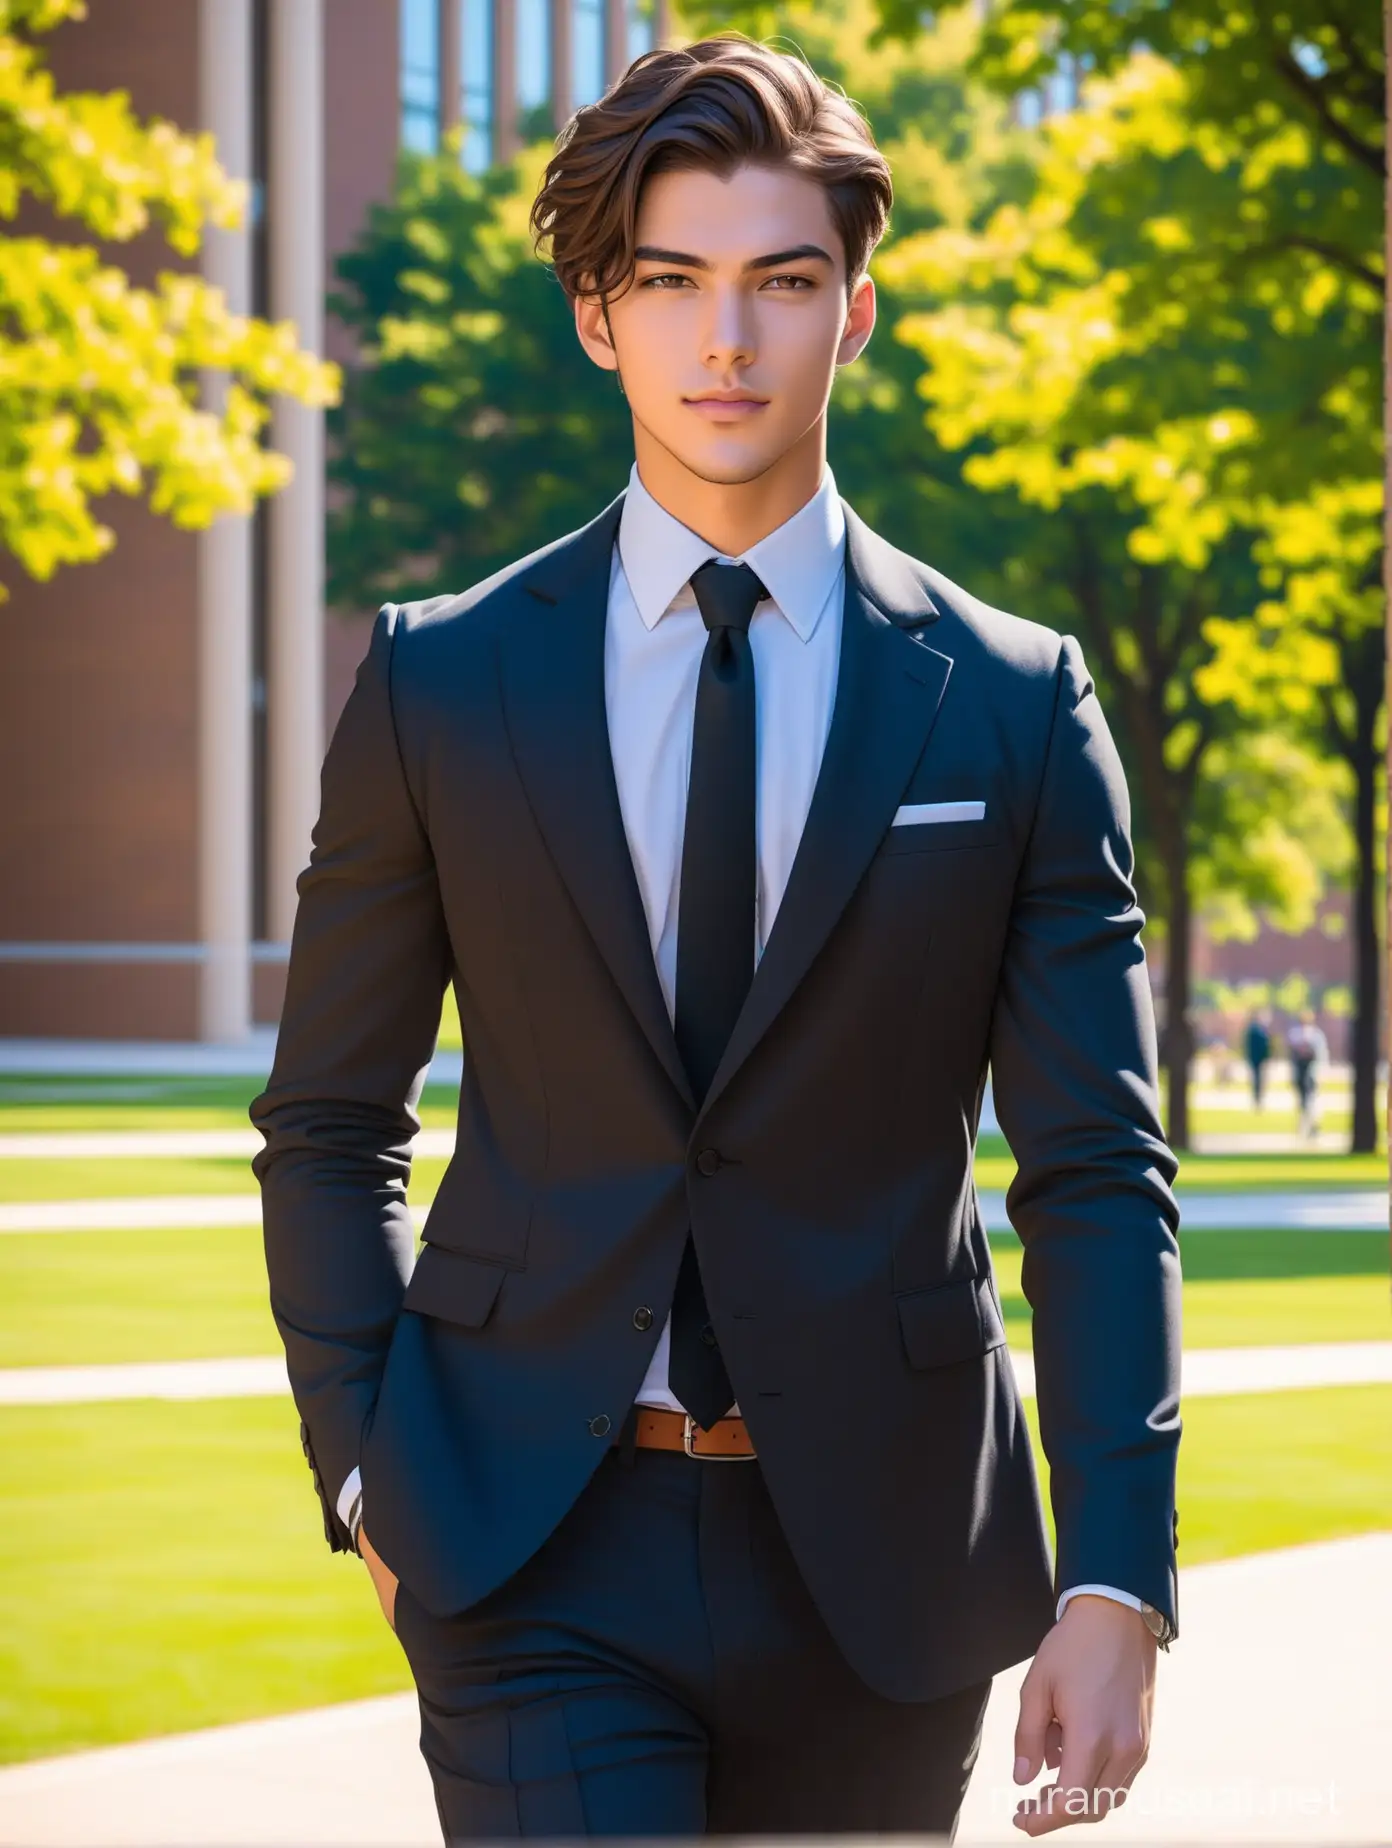 Young Professional in Suit on University Campus